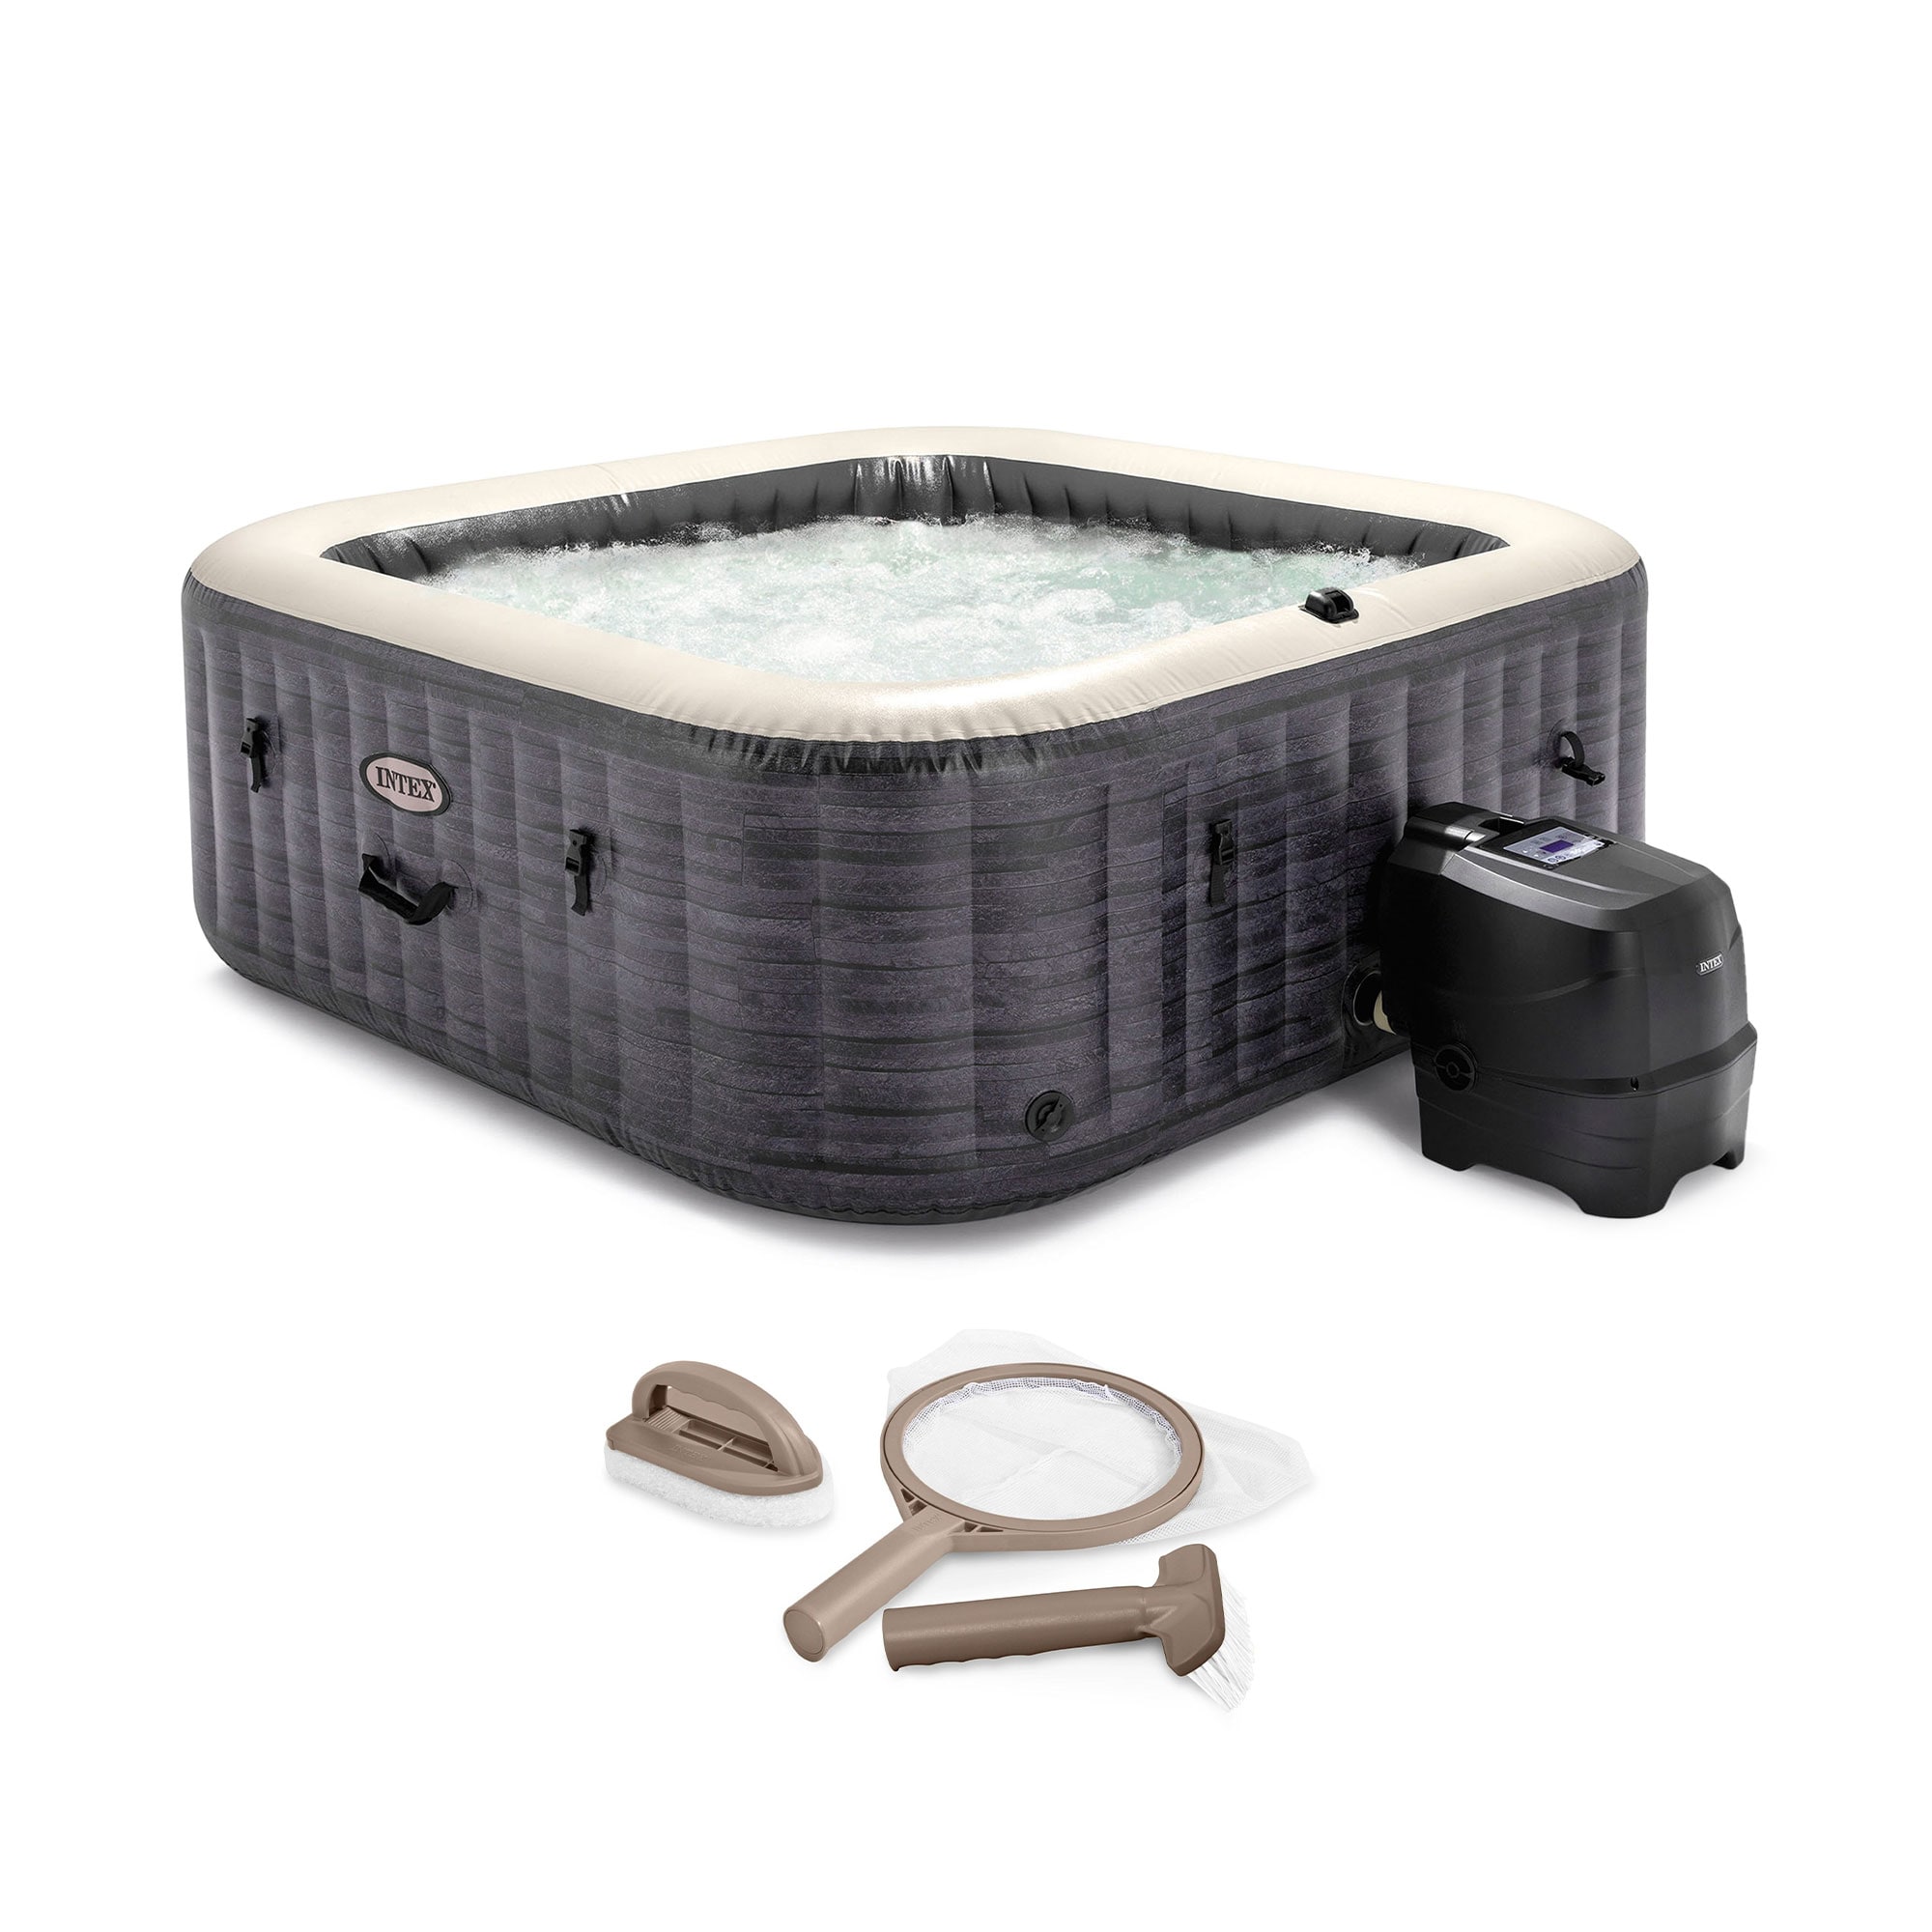 Productie subtiel Pelgrim Intex Intex PureSpa Plus Inflatable Square Hot Tub Spa with Maintenance  Accessory Kit in the Hot Tubs & Spas department at Lowes.com